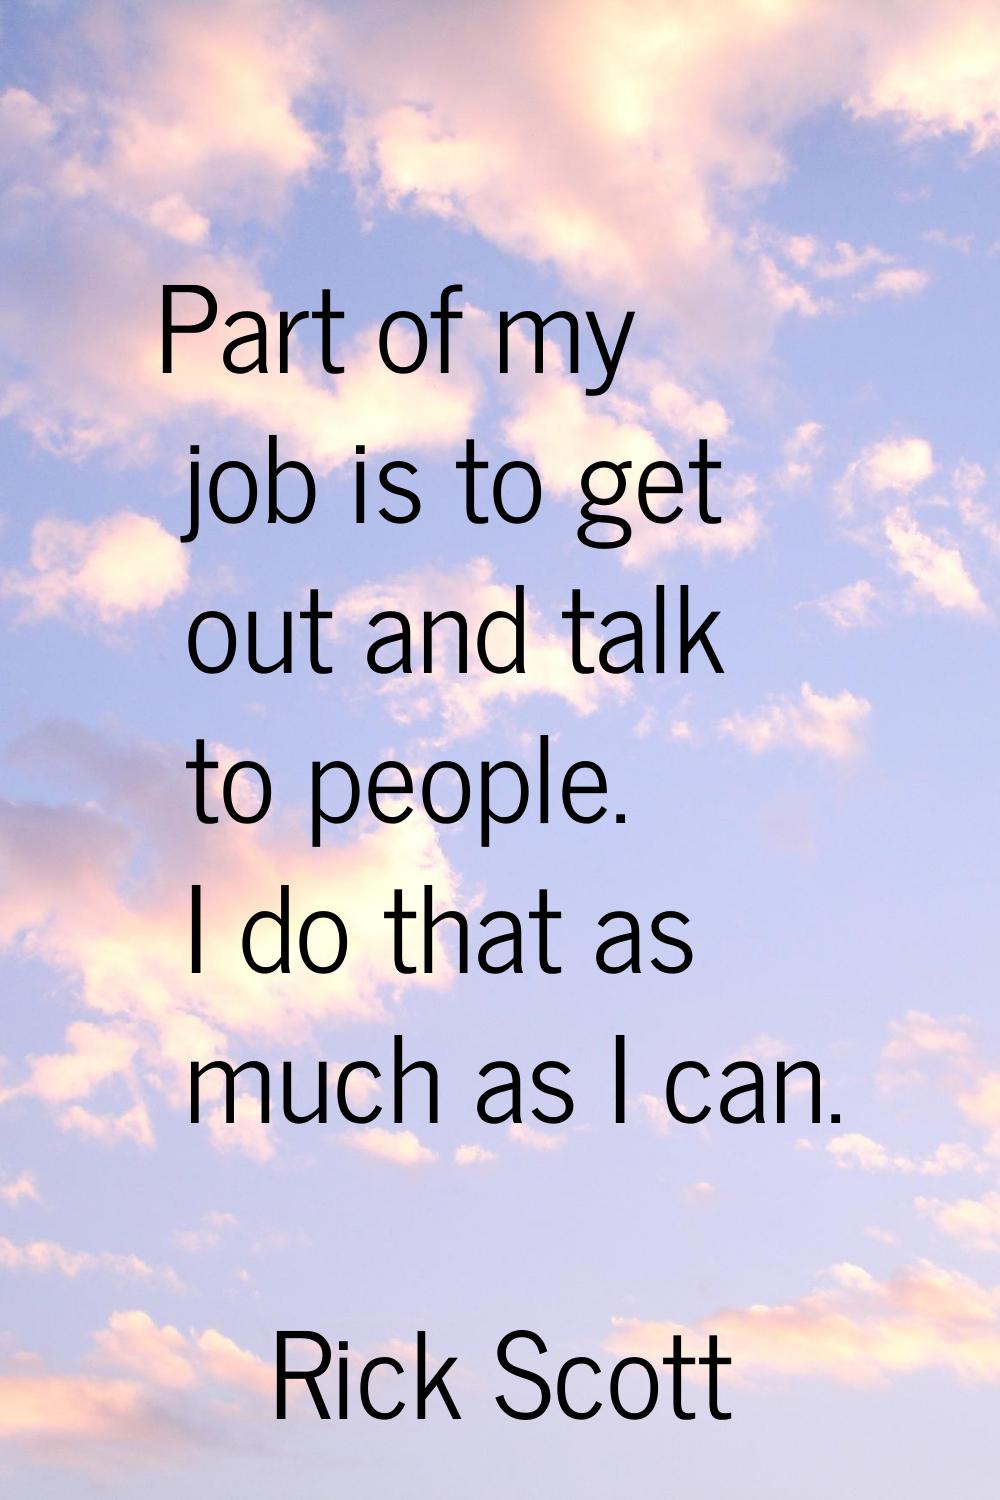 Part of my job is to get out and talk to people. I do that as much as I can.